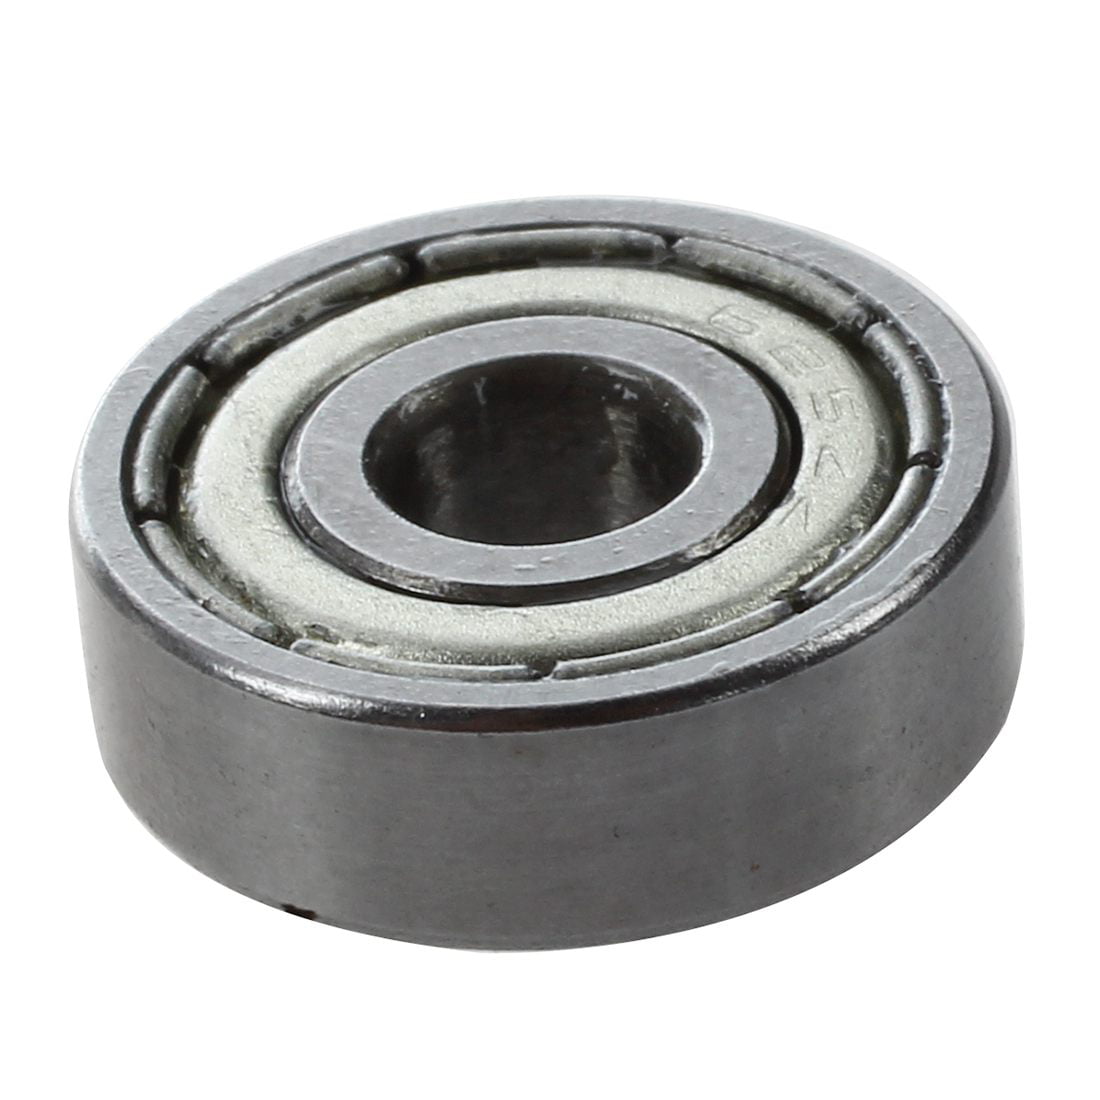 10 pieces of High Quality 625-ZZ bearing  625 ZZ bearings 5mm x 16mm x 5mm 